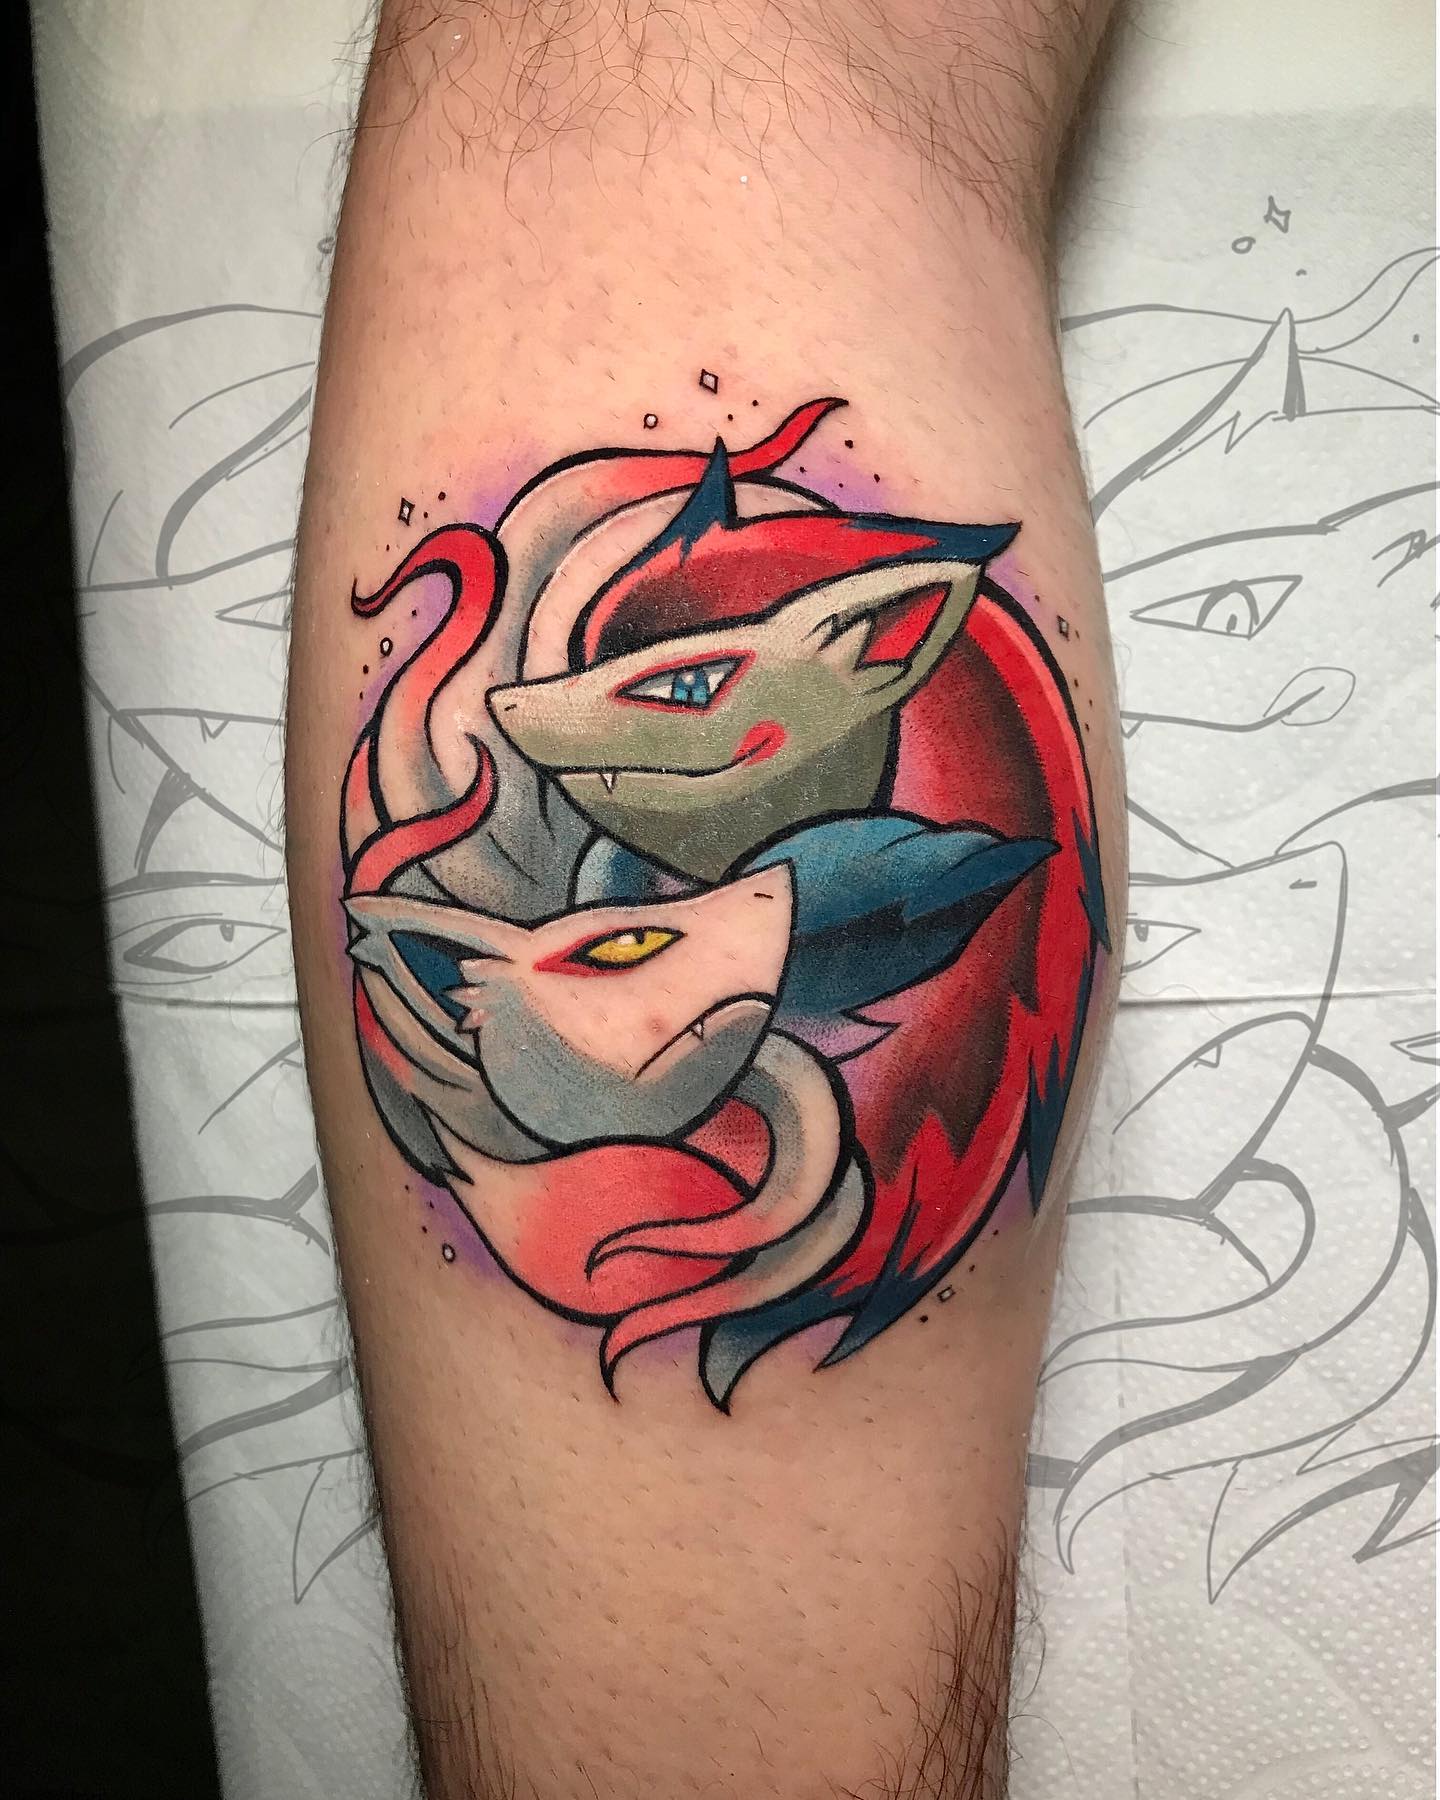 Zoroark tattoo is a mythical Pokémon. It's a shape-shifter, and can transform into a human or Pokémon, although it's prefers to stay in his Pokémon form. You need to get the tattoo of this character which has an ability to sense if an individual is lying or not.